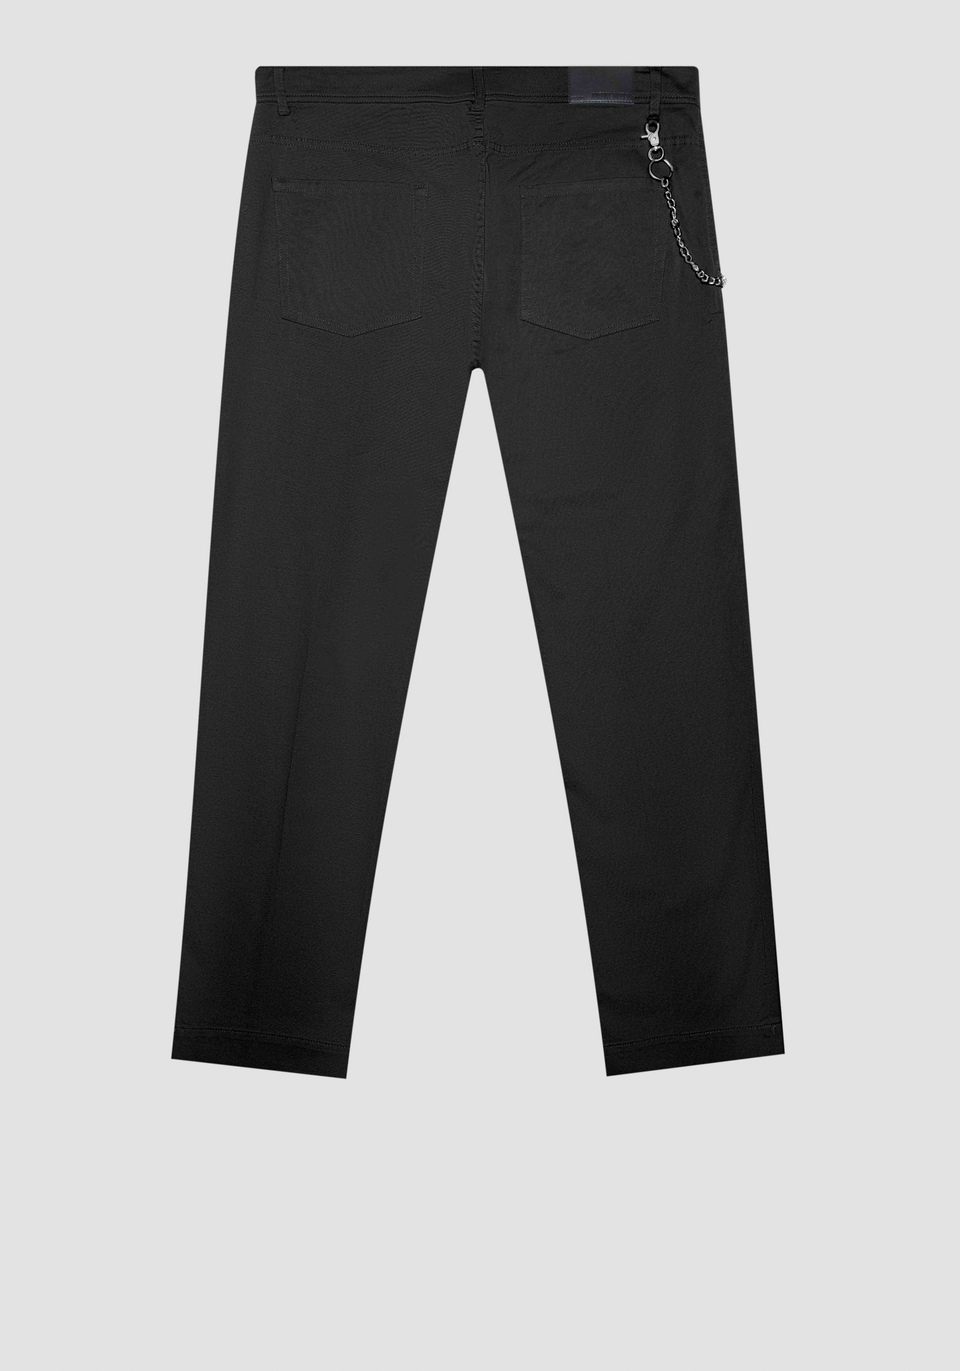 "OLIVER" SLIM FIT ANKLE LENGTH TROUSERS IN ELASTIC COTTON - Antony Morato Online Shop